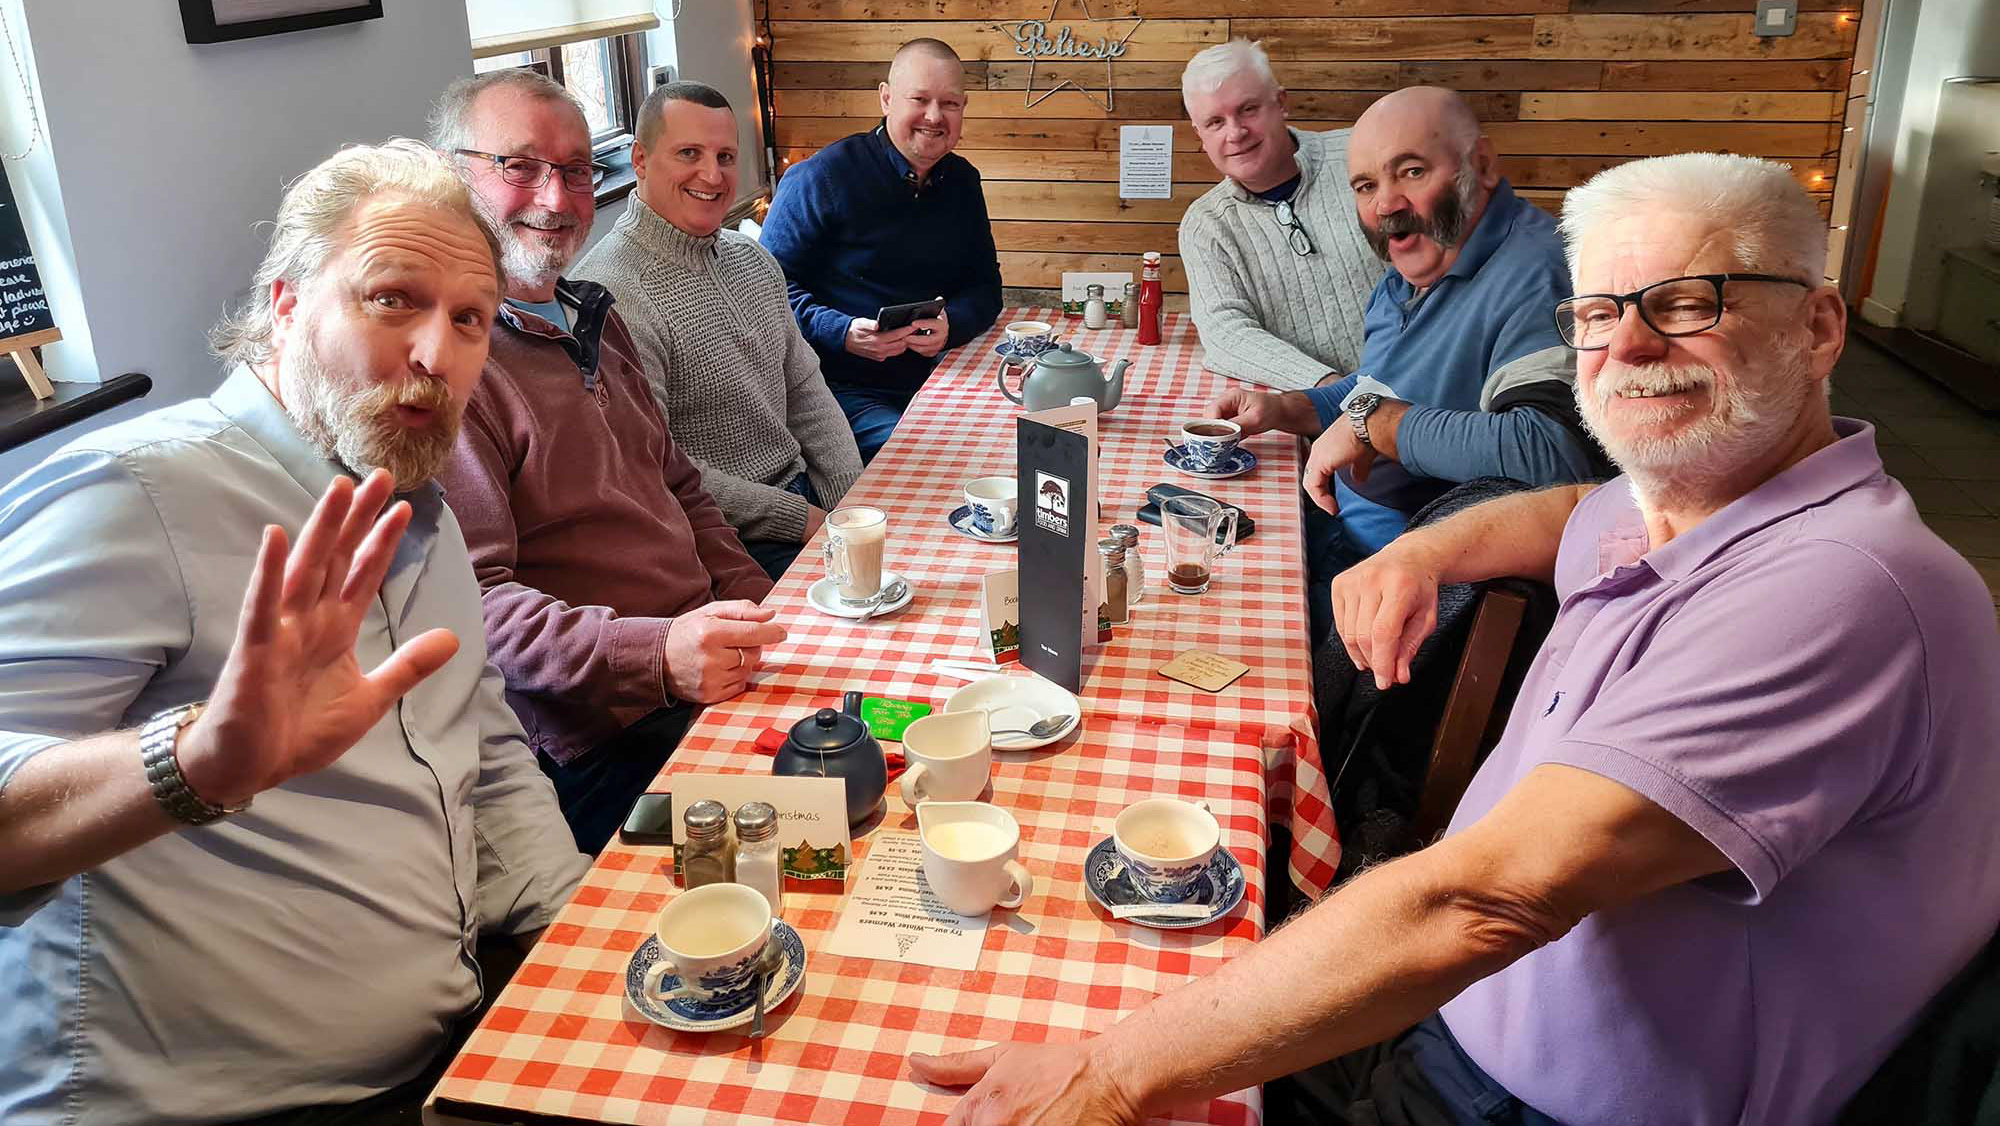 The members of Pyfleet Lodge Breakfast Club all sat around a long table with a red gingham tablecloth